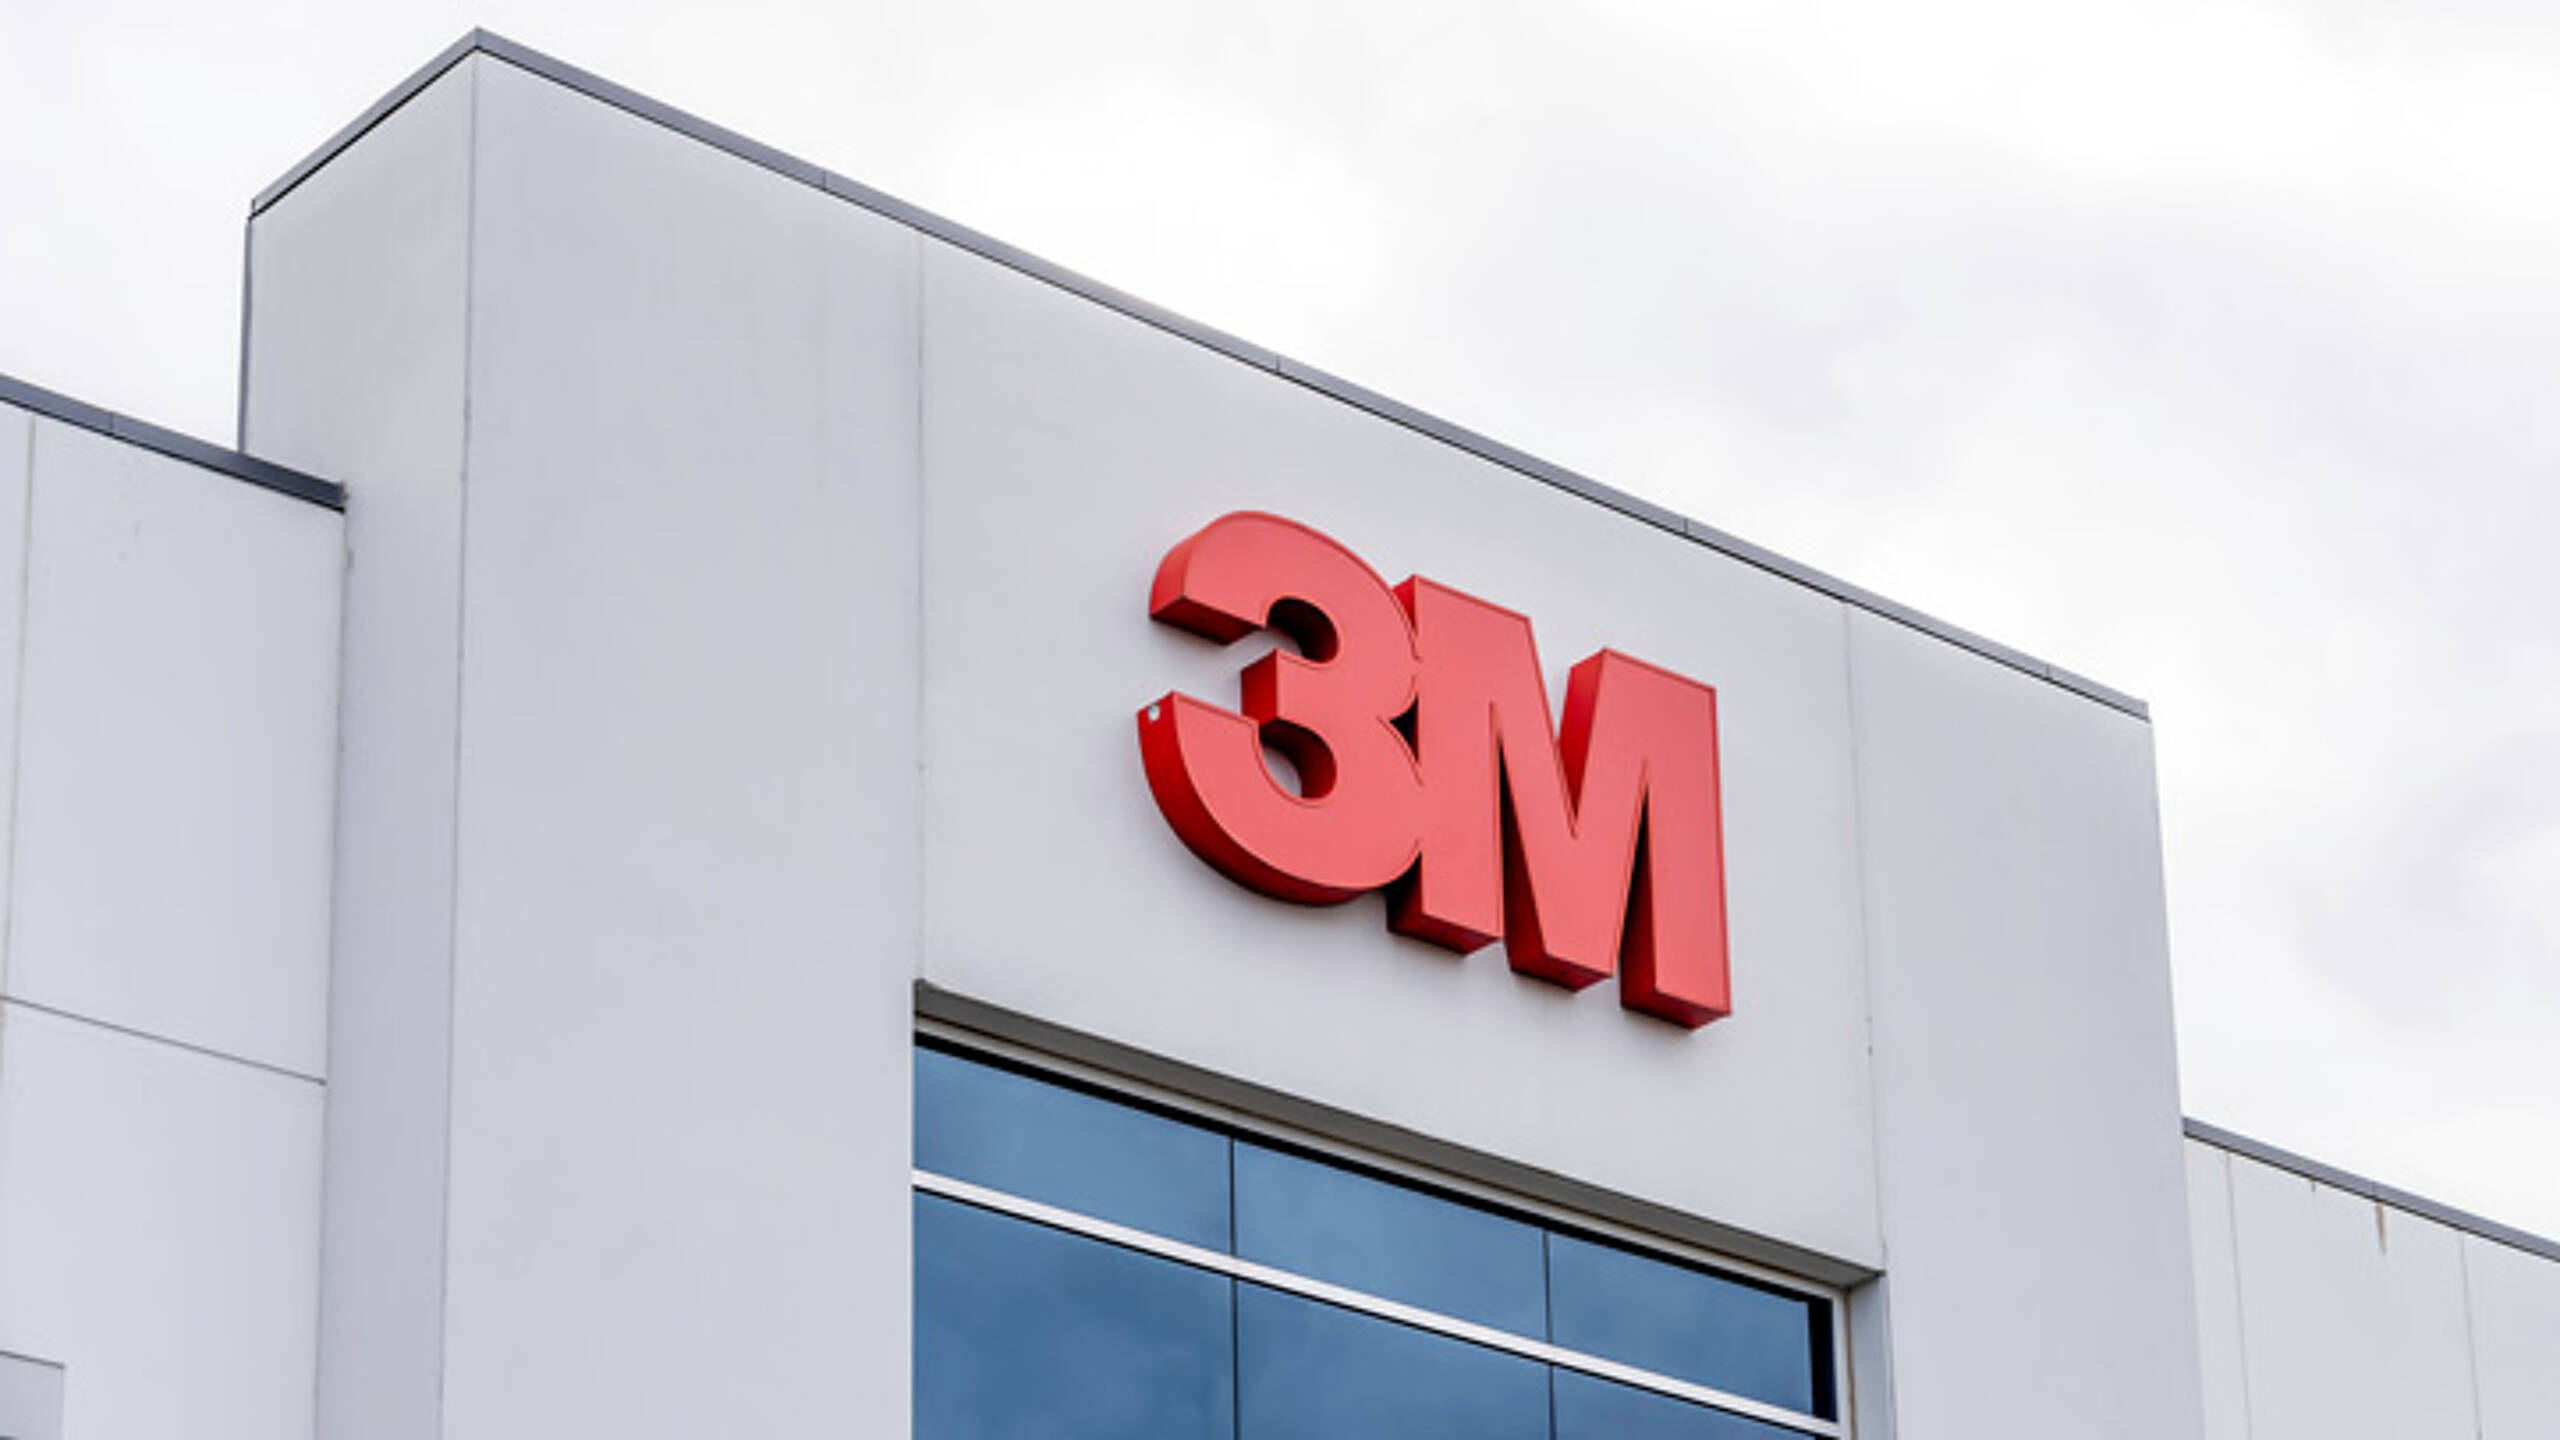 3M to phase out production and sale of 'forever chemicals' by 2025 - edie